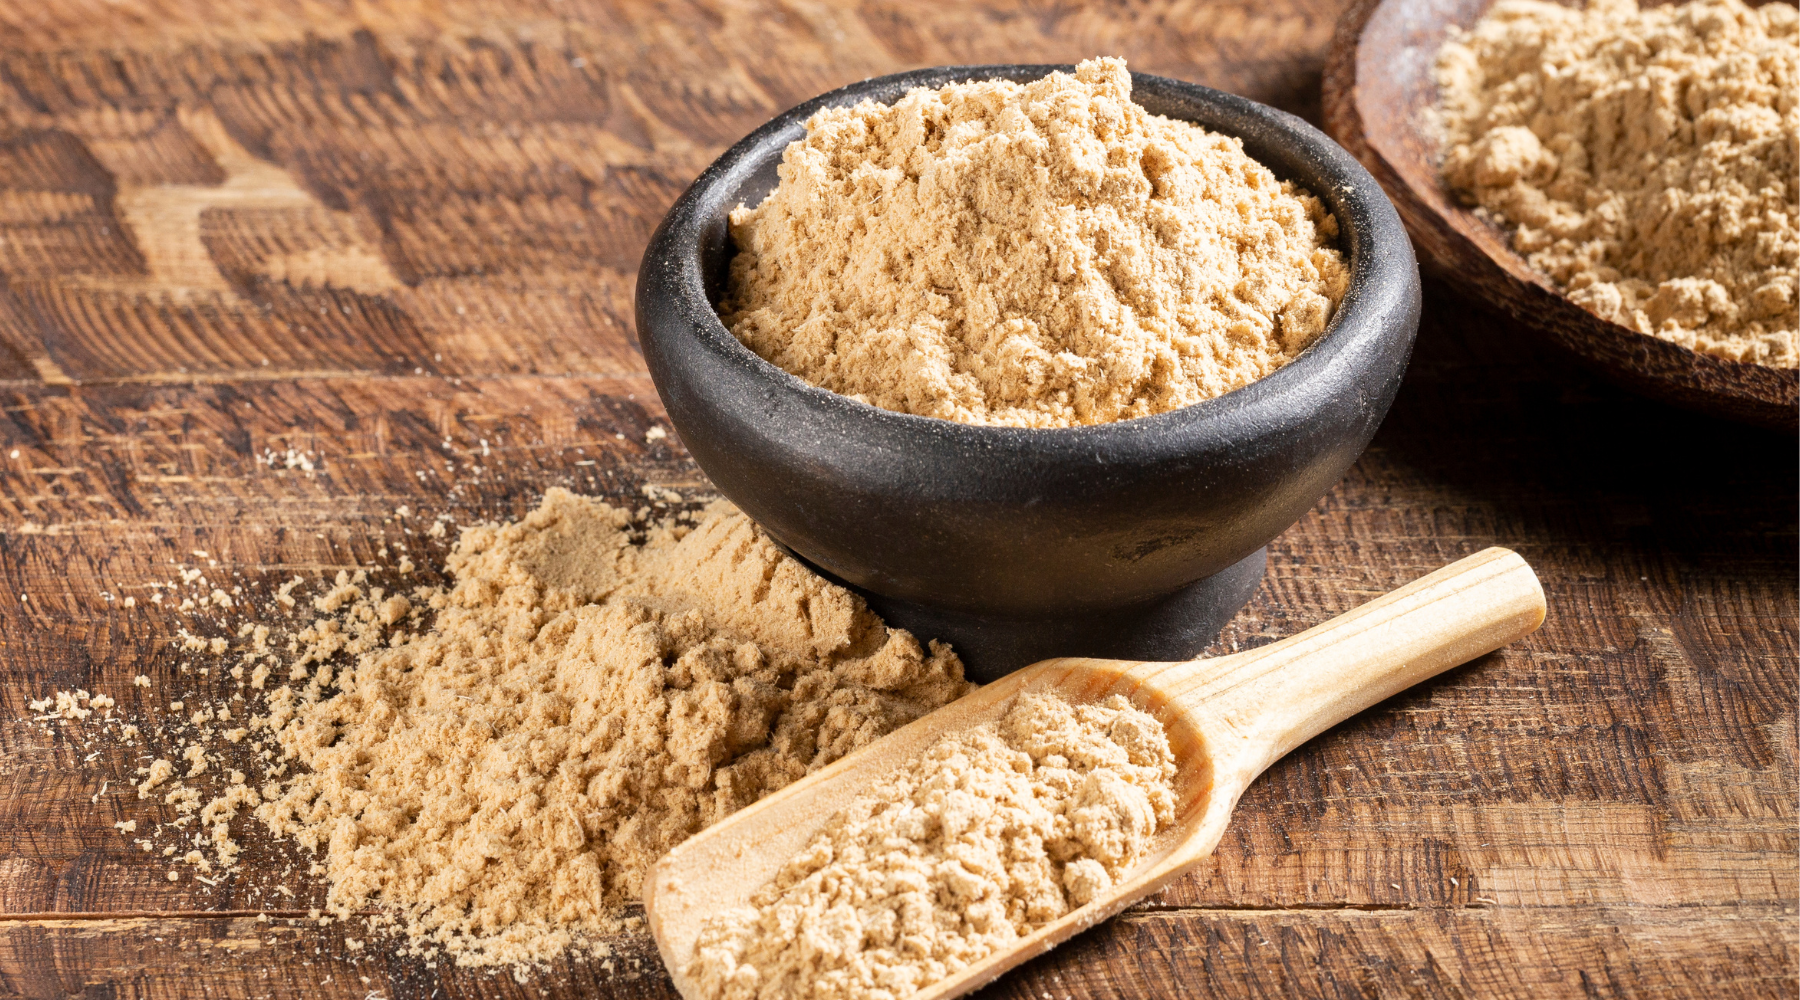 5 Little-Known Benefits of Maca Ranging From Mood to Fertility